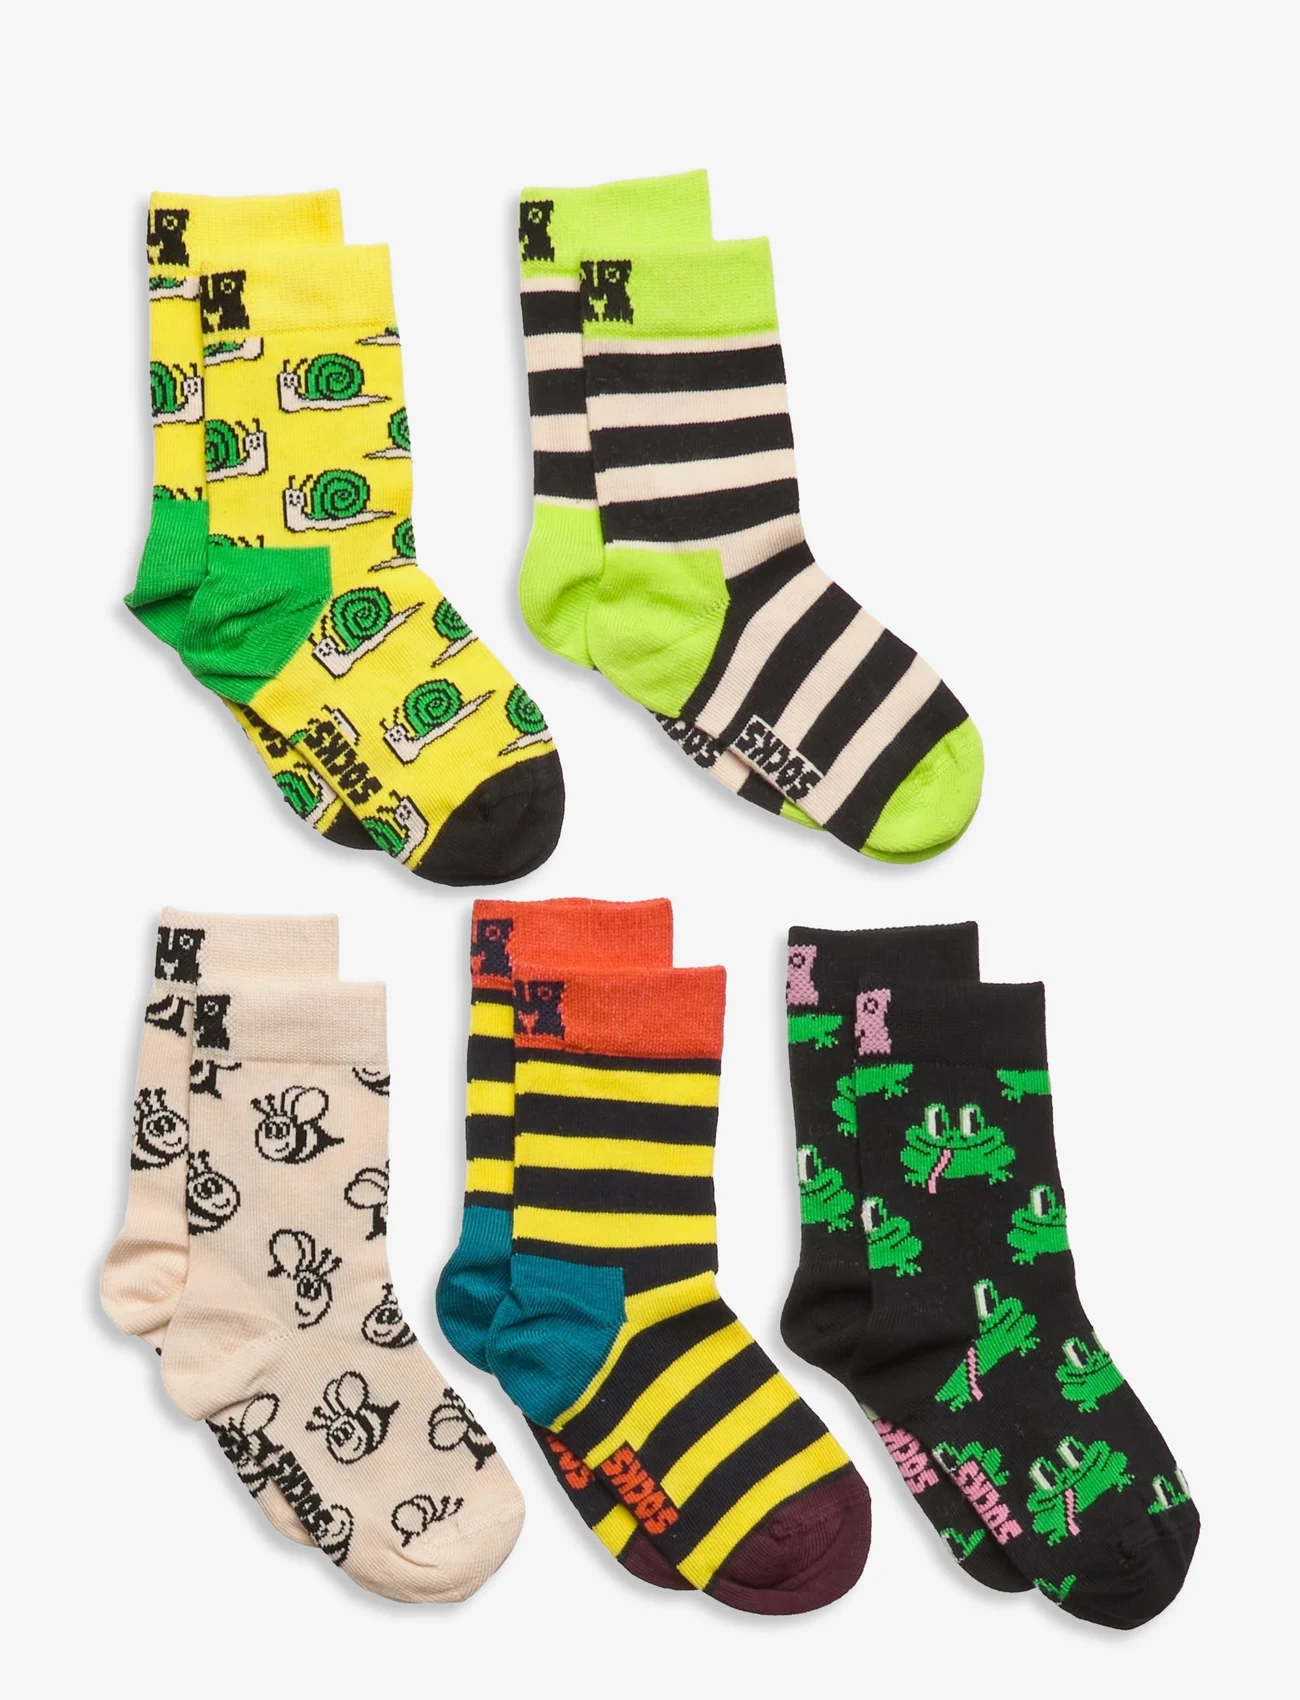 Happy Socks - Kids 5-Pack Boozt Gift Set - lowest prices - yellow - 0